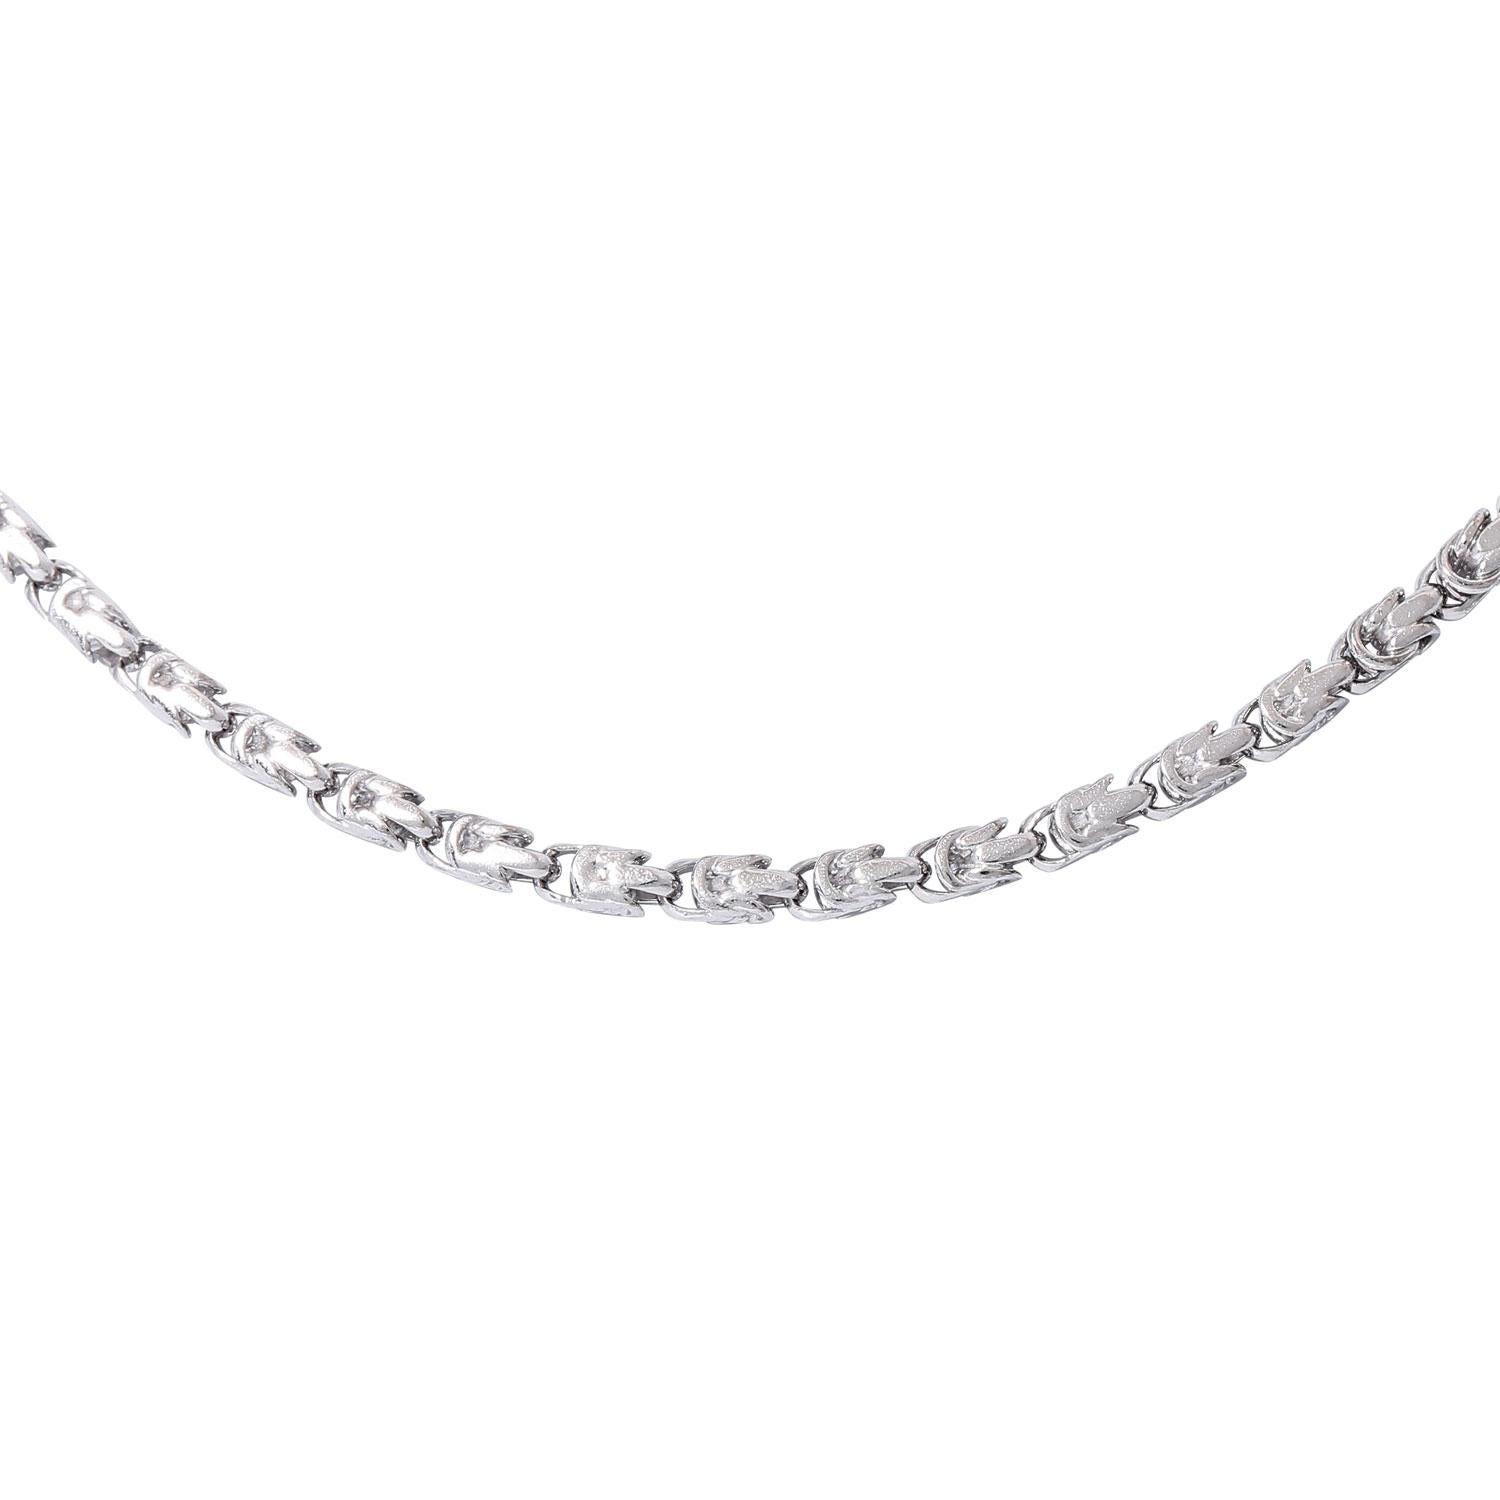 PT 950, 31.6 g, L: approx. 43 cm, W: approx. 3 mm, late 20th century, minimal signs of wear.

 Byzantine necklace, 950 platinum, 31.6 g, L: approx. 43 cm, W: approx. 3 mm, late 20th century, minimal signs of wear.
